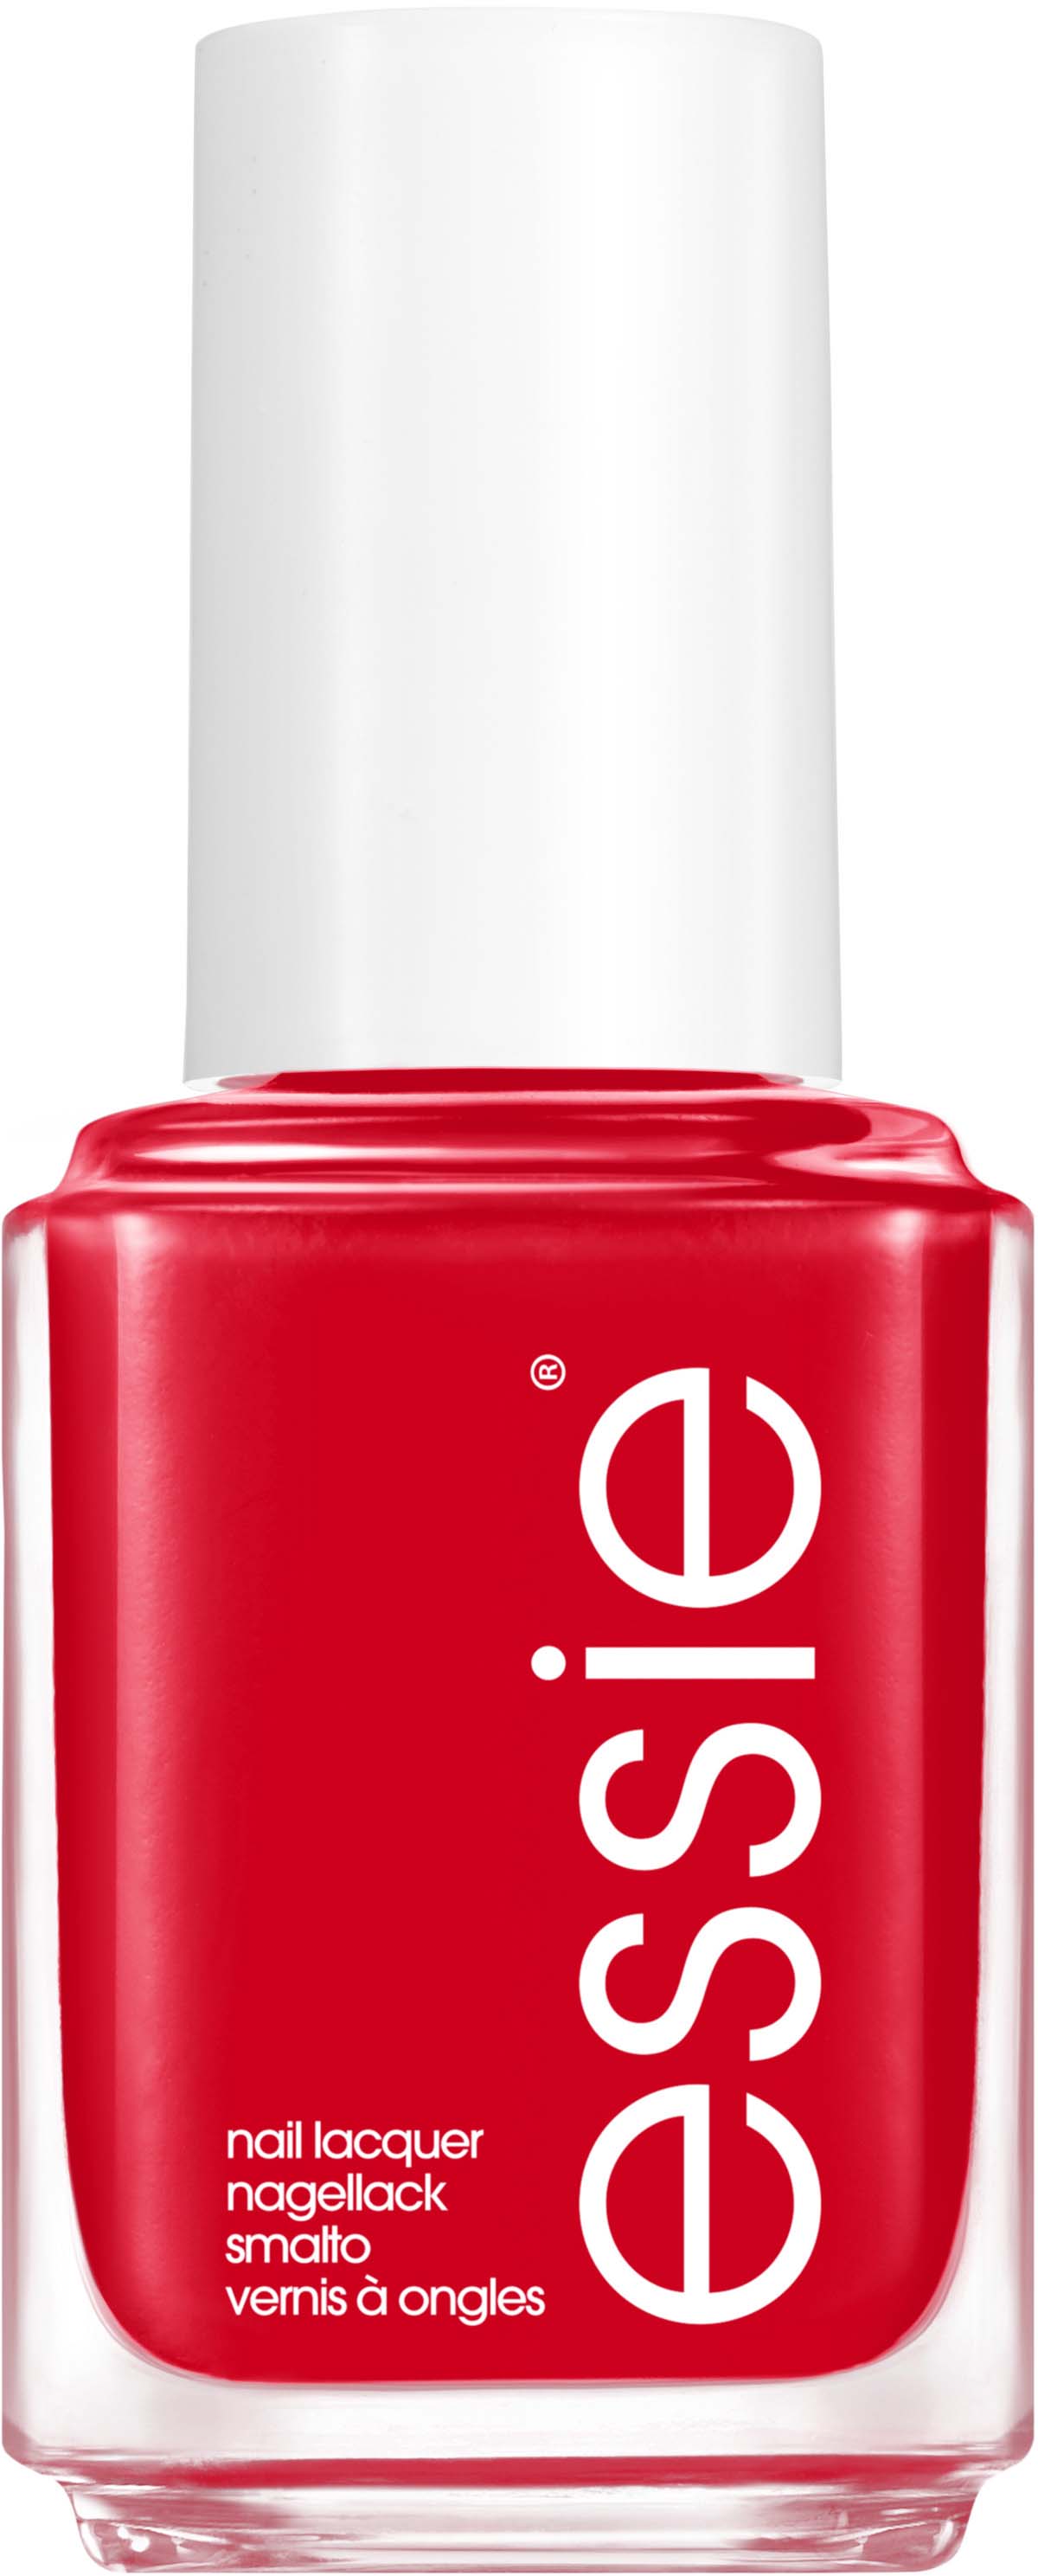 Essie Nail Lacquer Russian Roulette 61